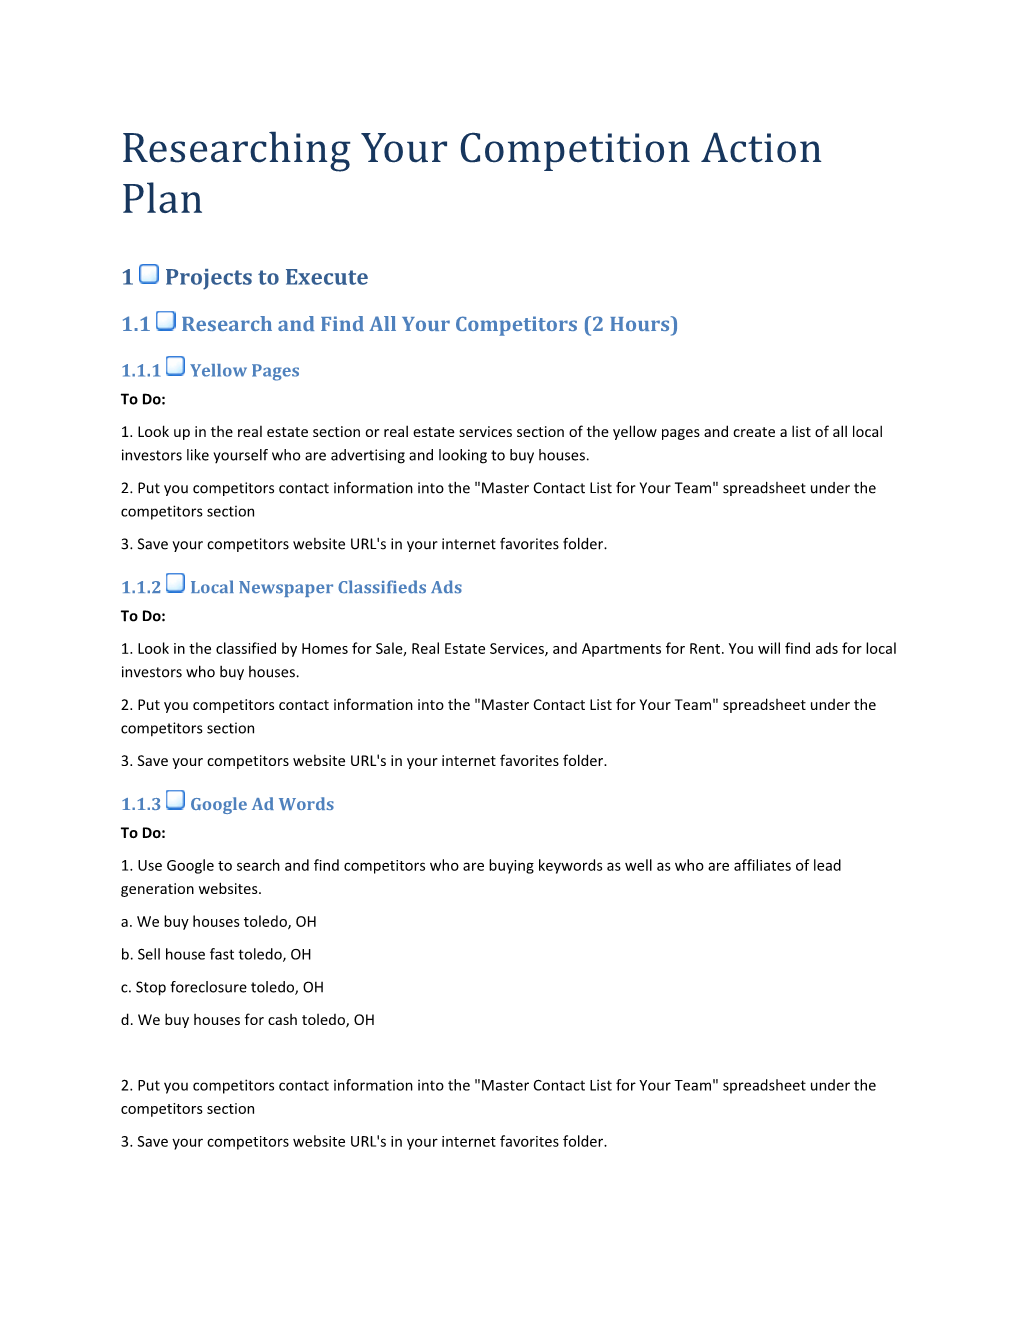 Researching Your Competition Action Plan